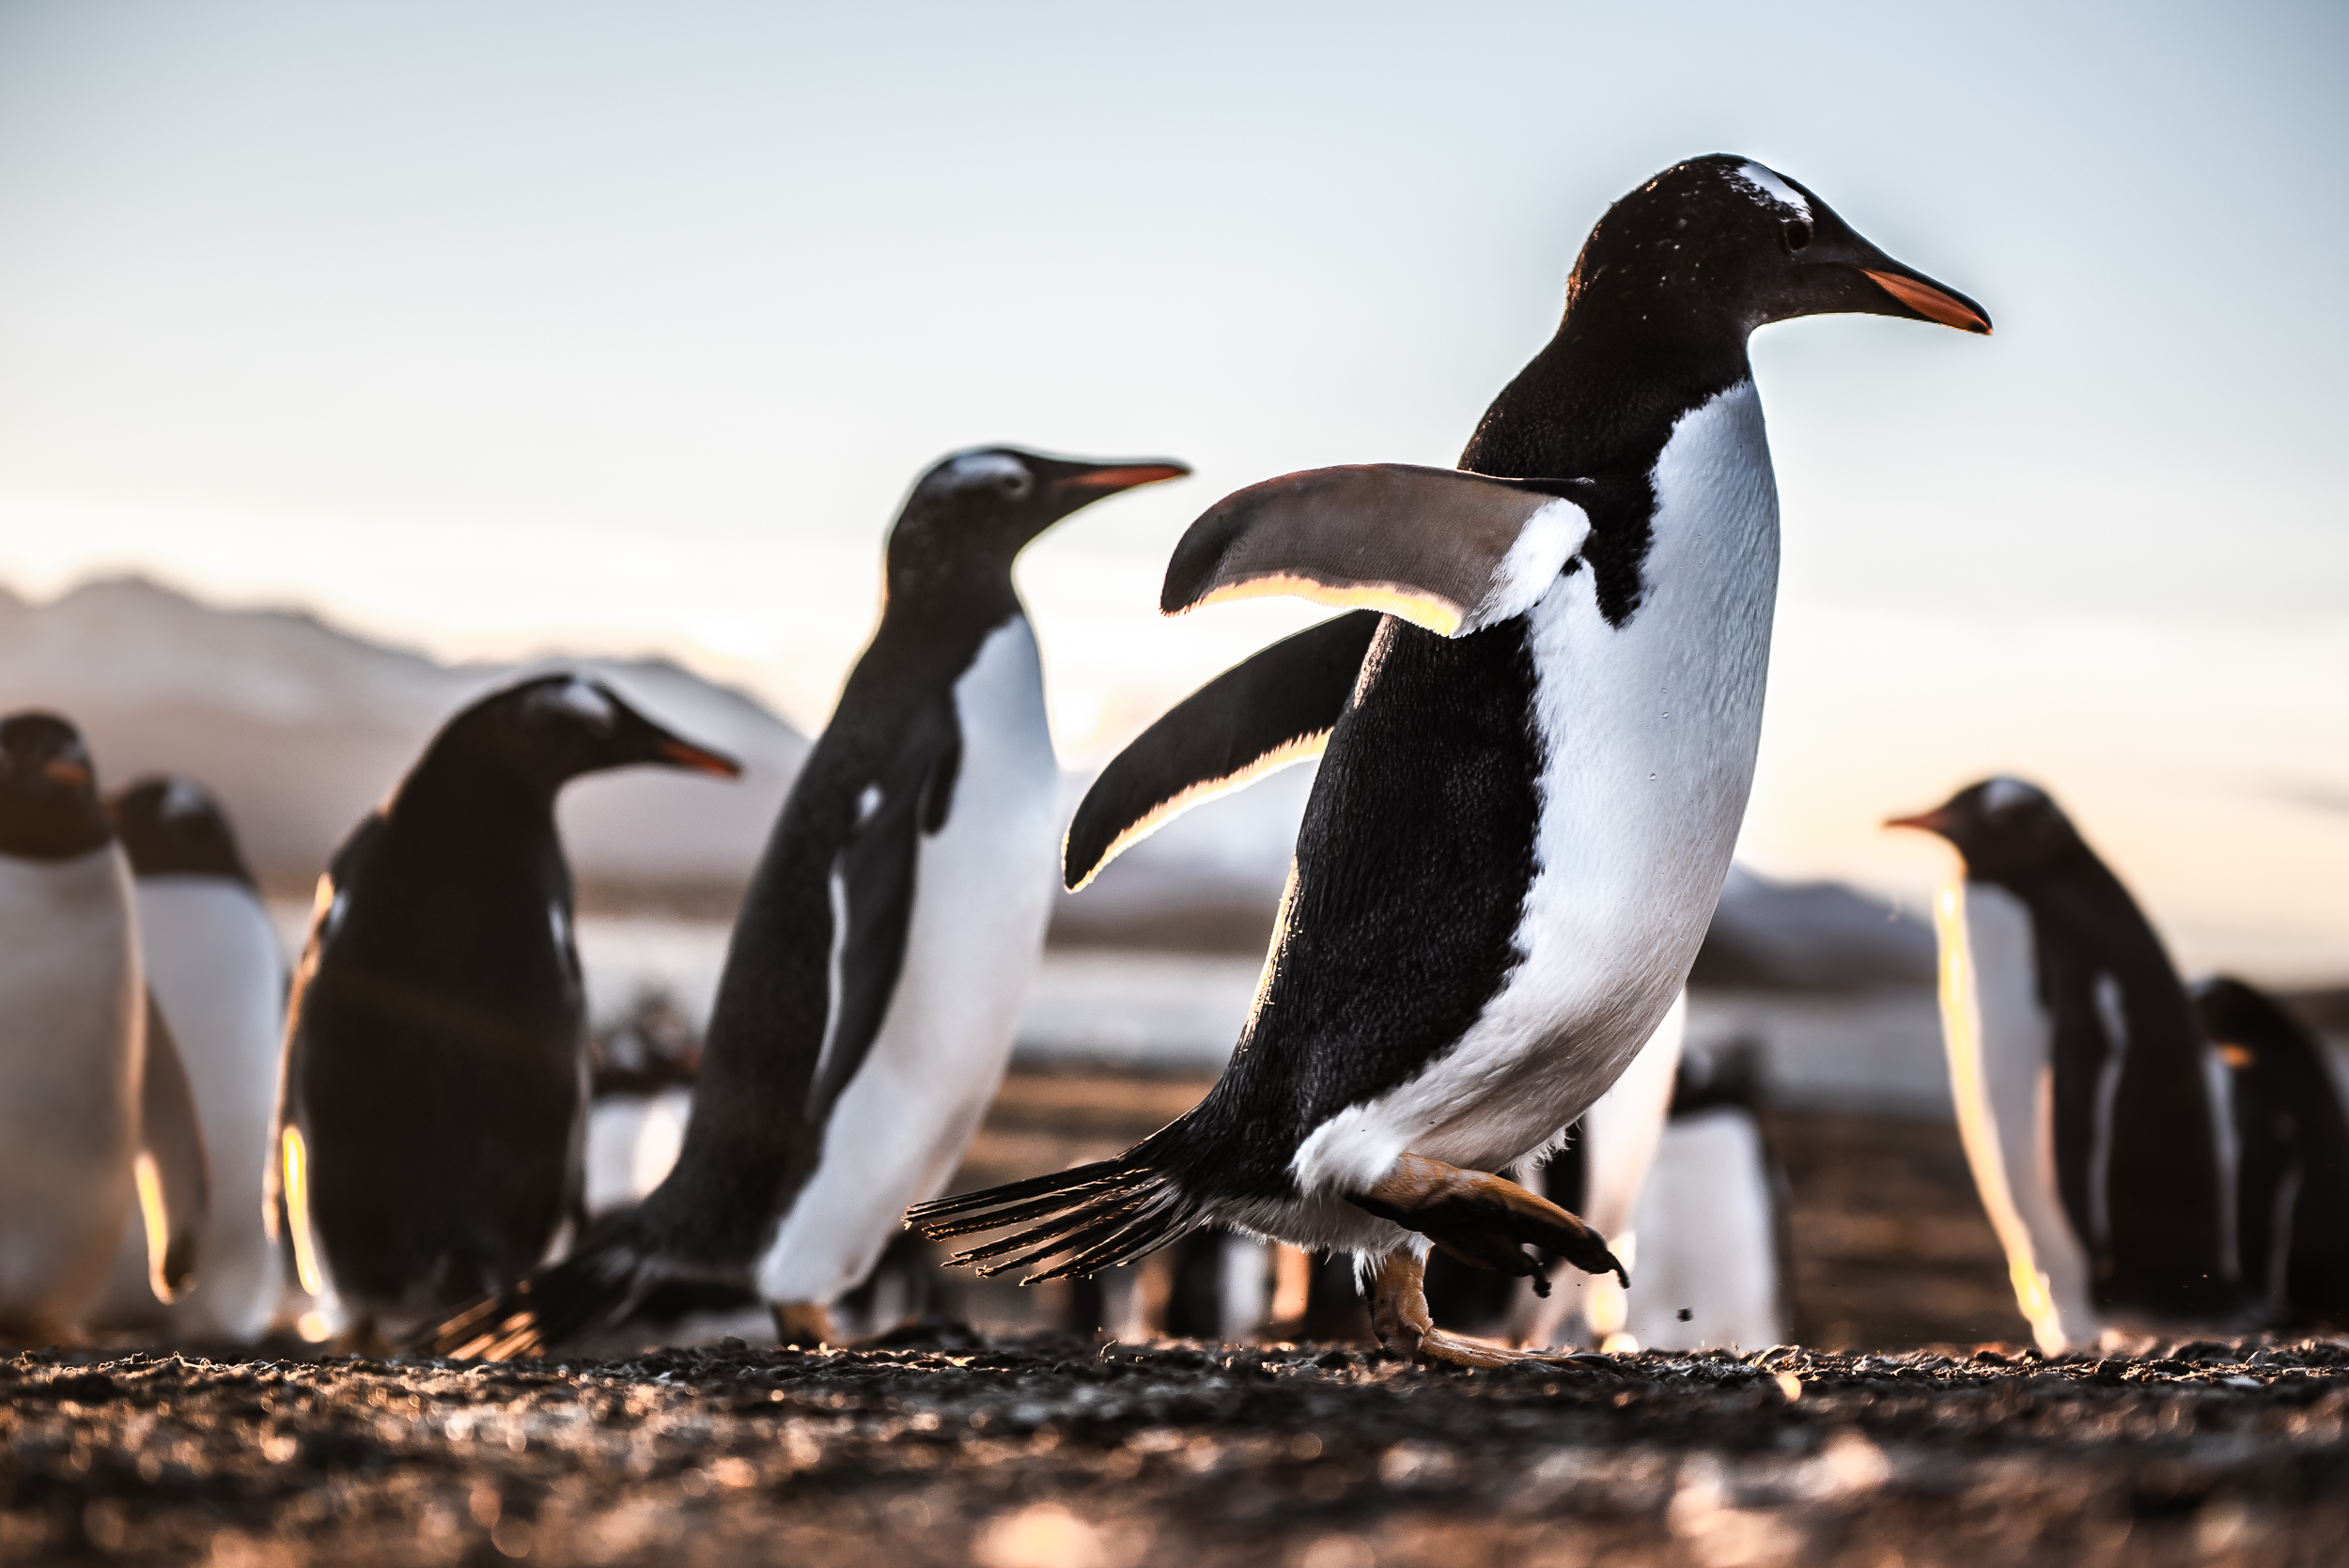 Smaller penguins need to chase their parents for food.Nobody knows for sure why this penguin species chose the hammer island to breed, is believed to be due to its location and geography